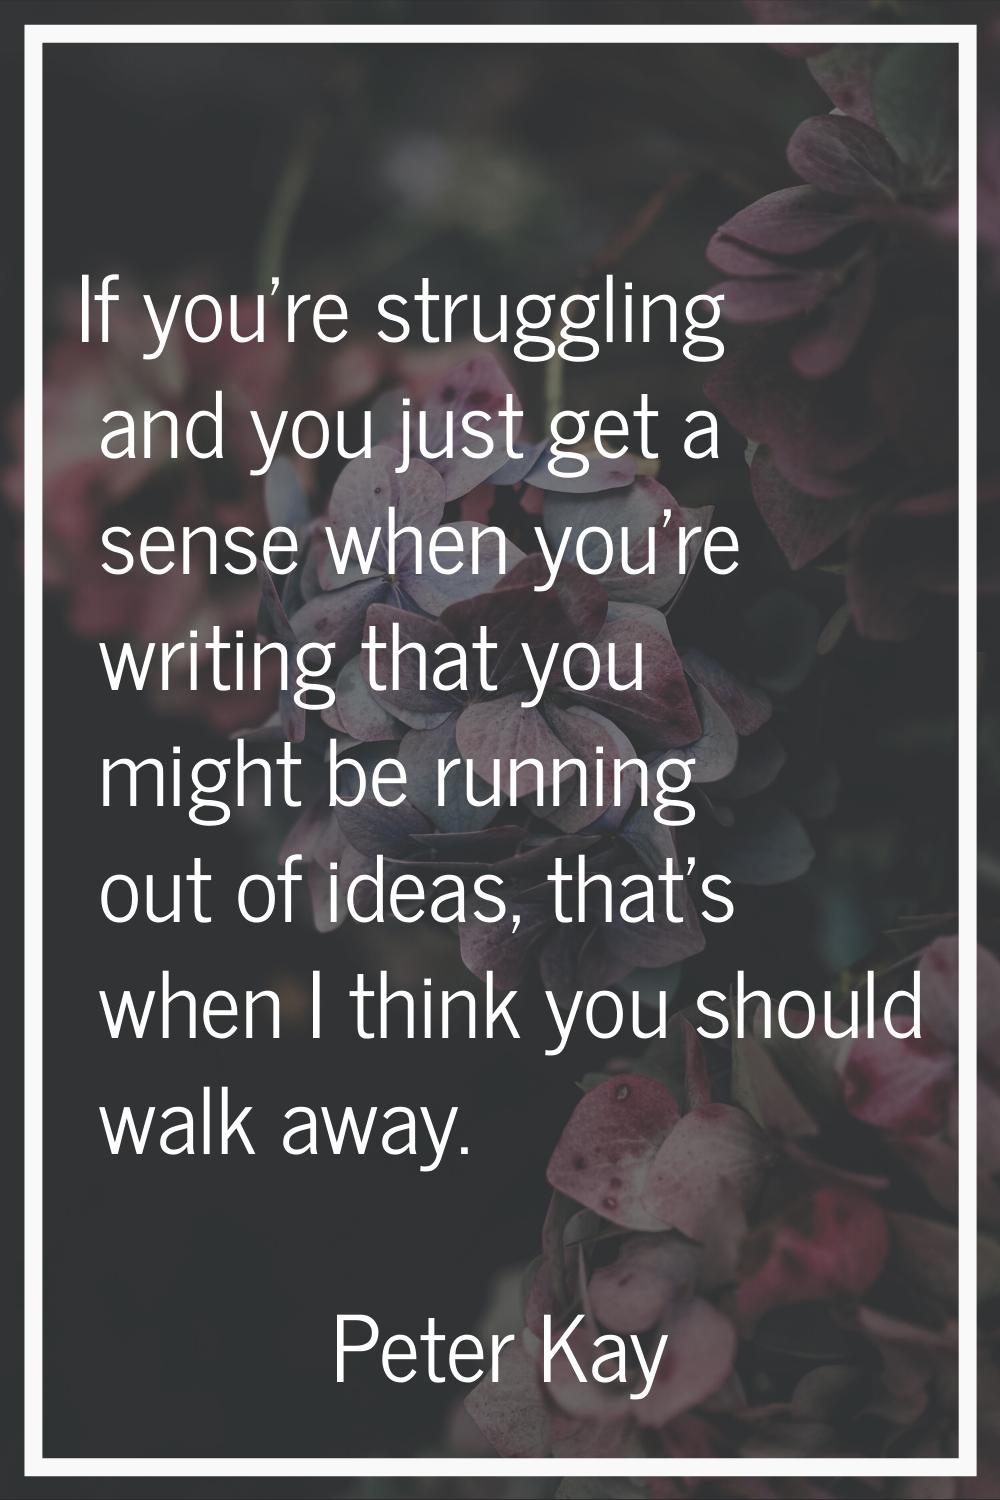 If you're struggling and you just get a sense when you're writing that you might be running out of 